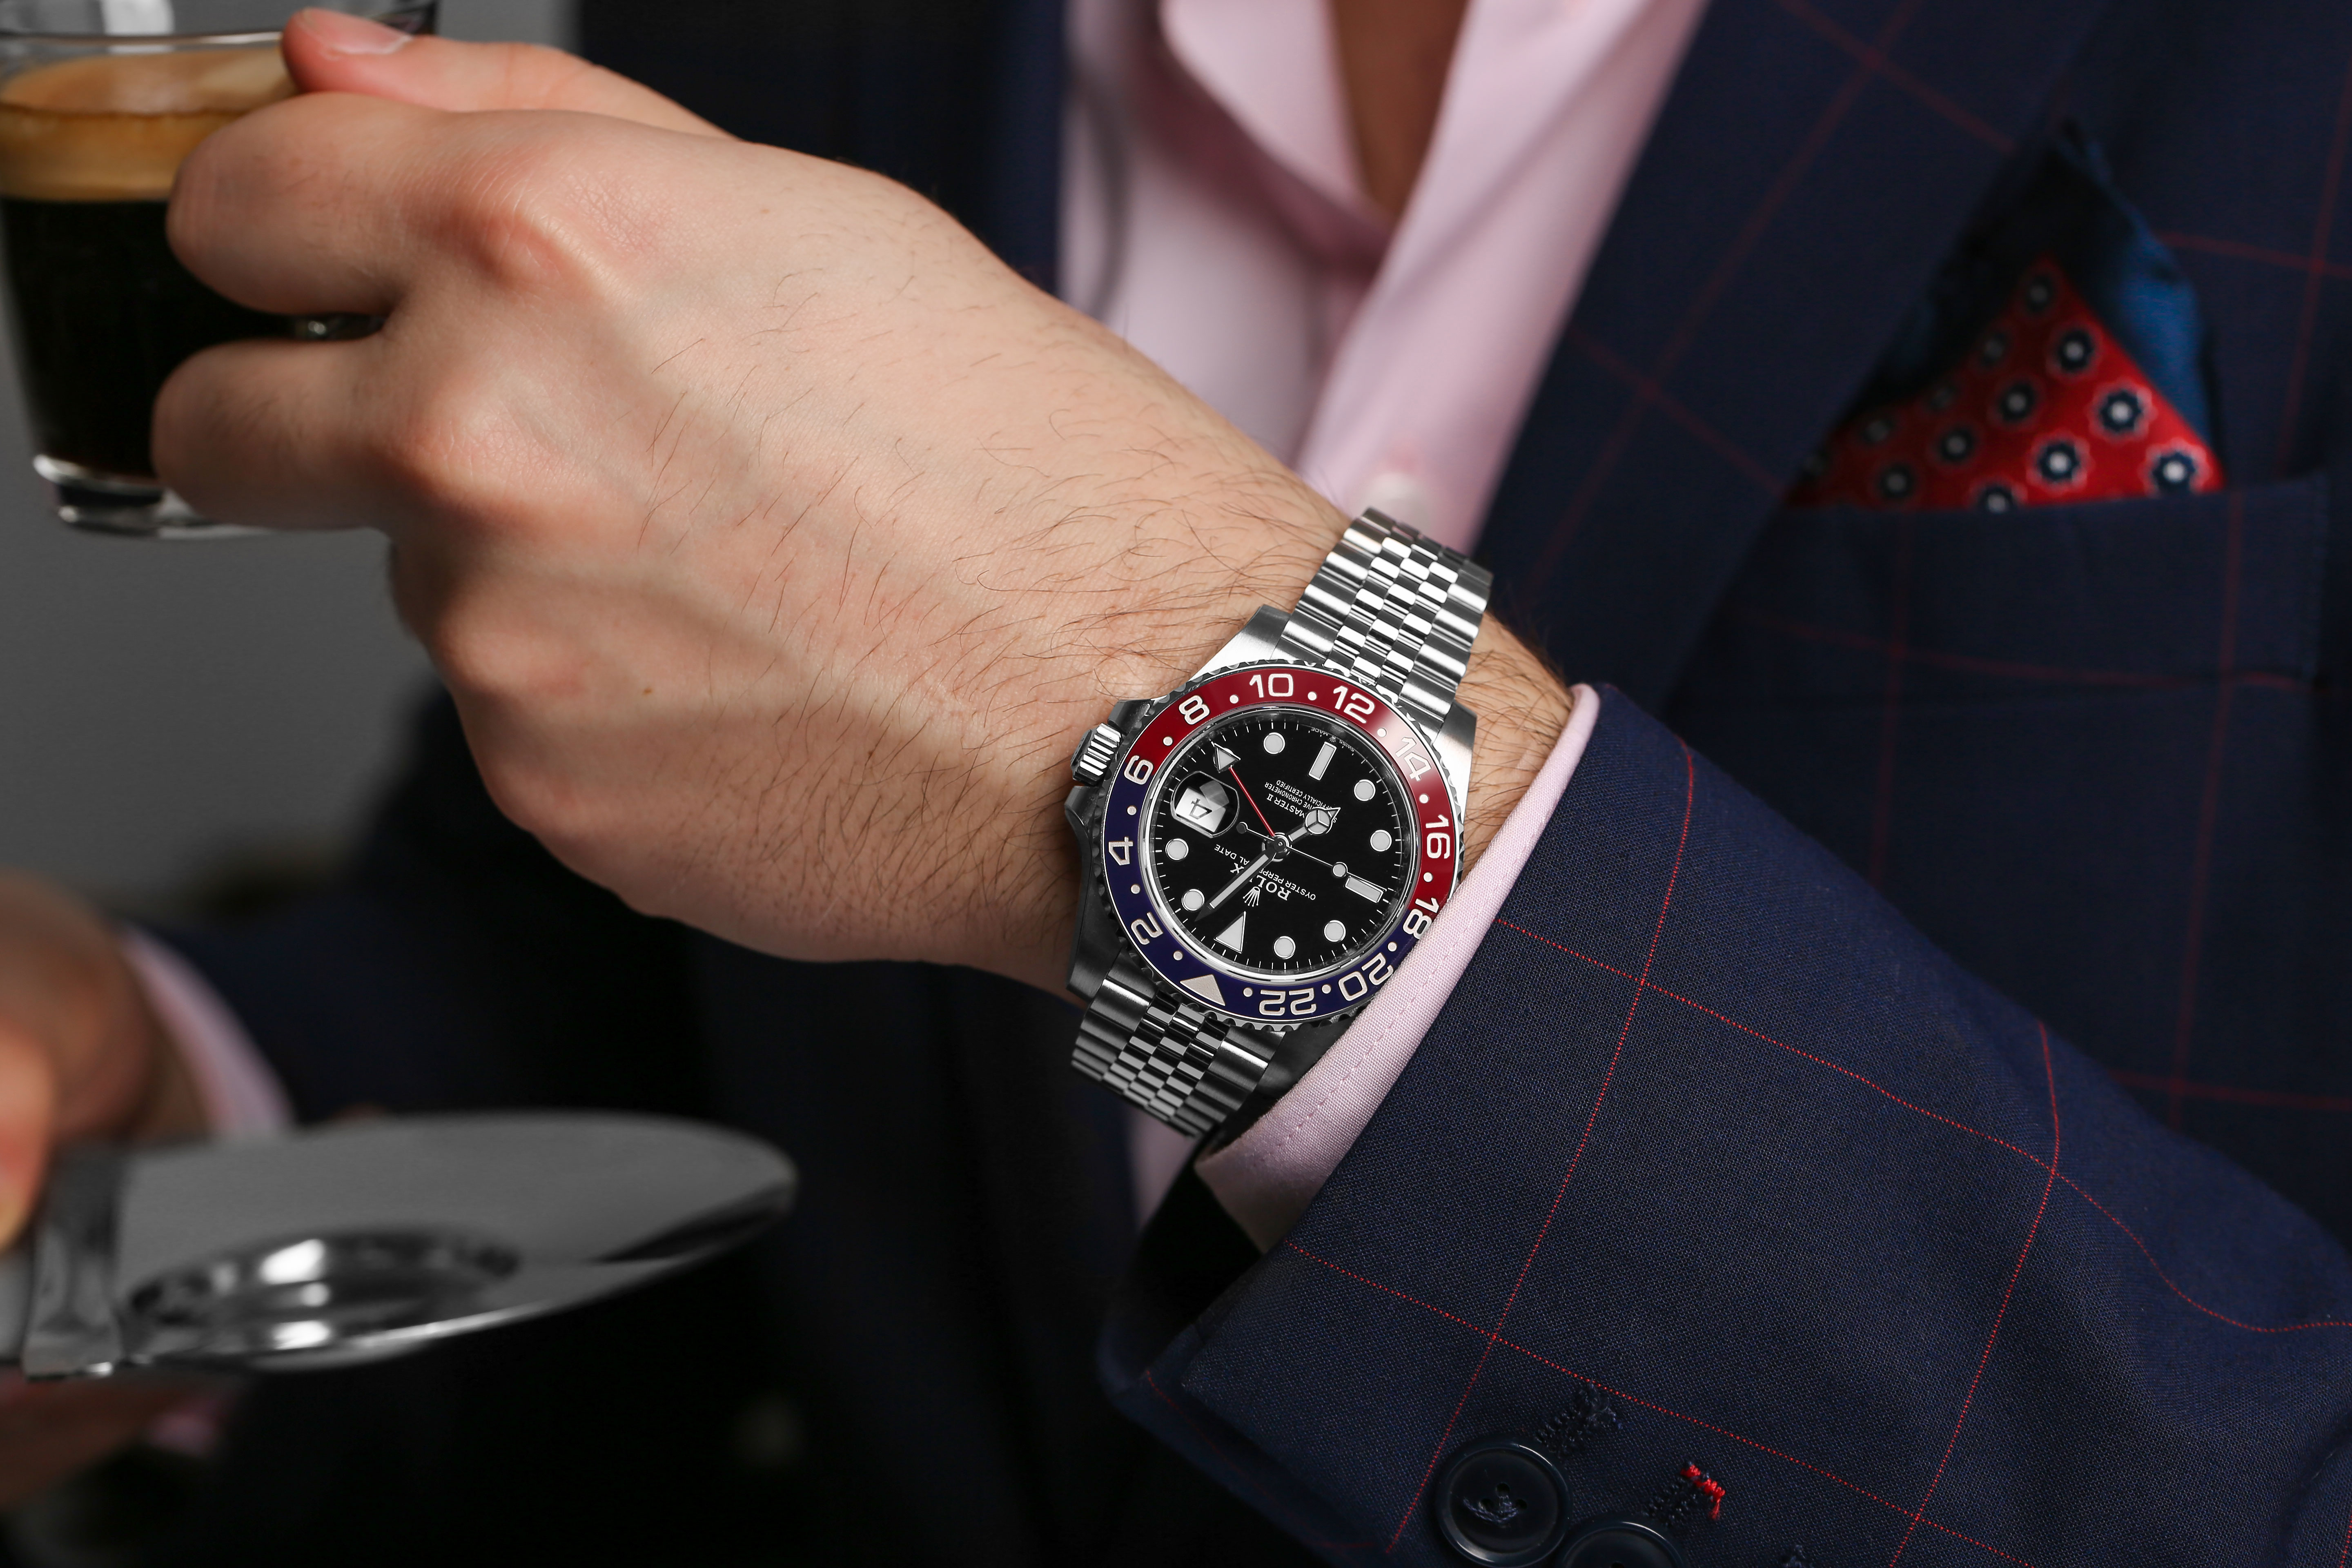 Stainless Steel Rolex GMT-Master II with Black Index Dial, 40 mm Case Size, and Bidirectional Ceramic Bezel Displayed on a Man’s Wrist.